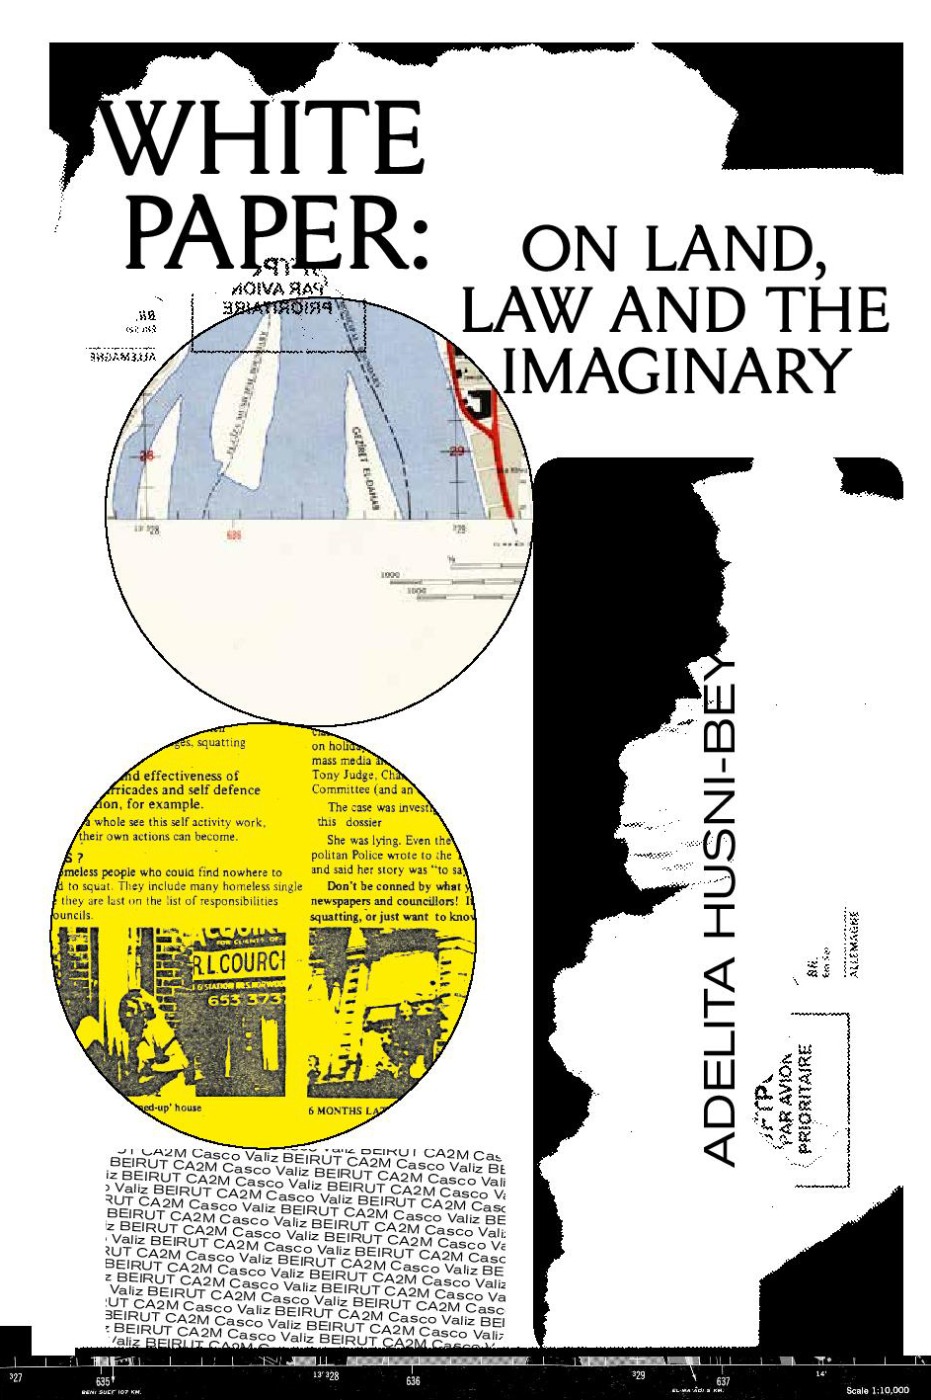 White Paper – On Land, Law and the Imaginary